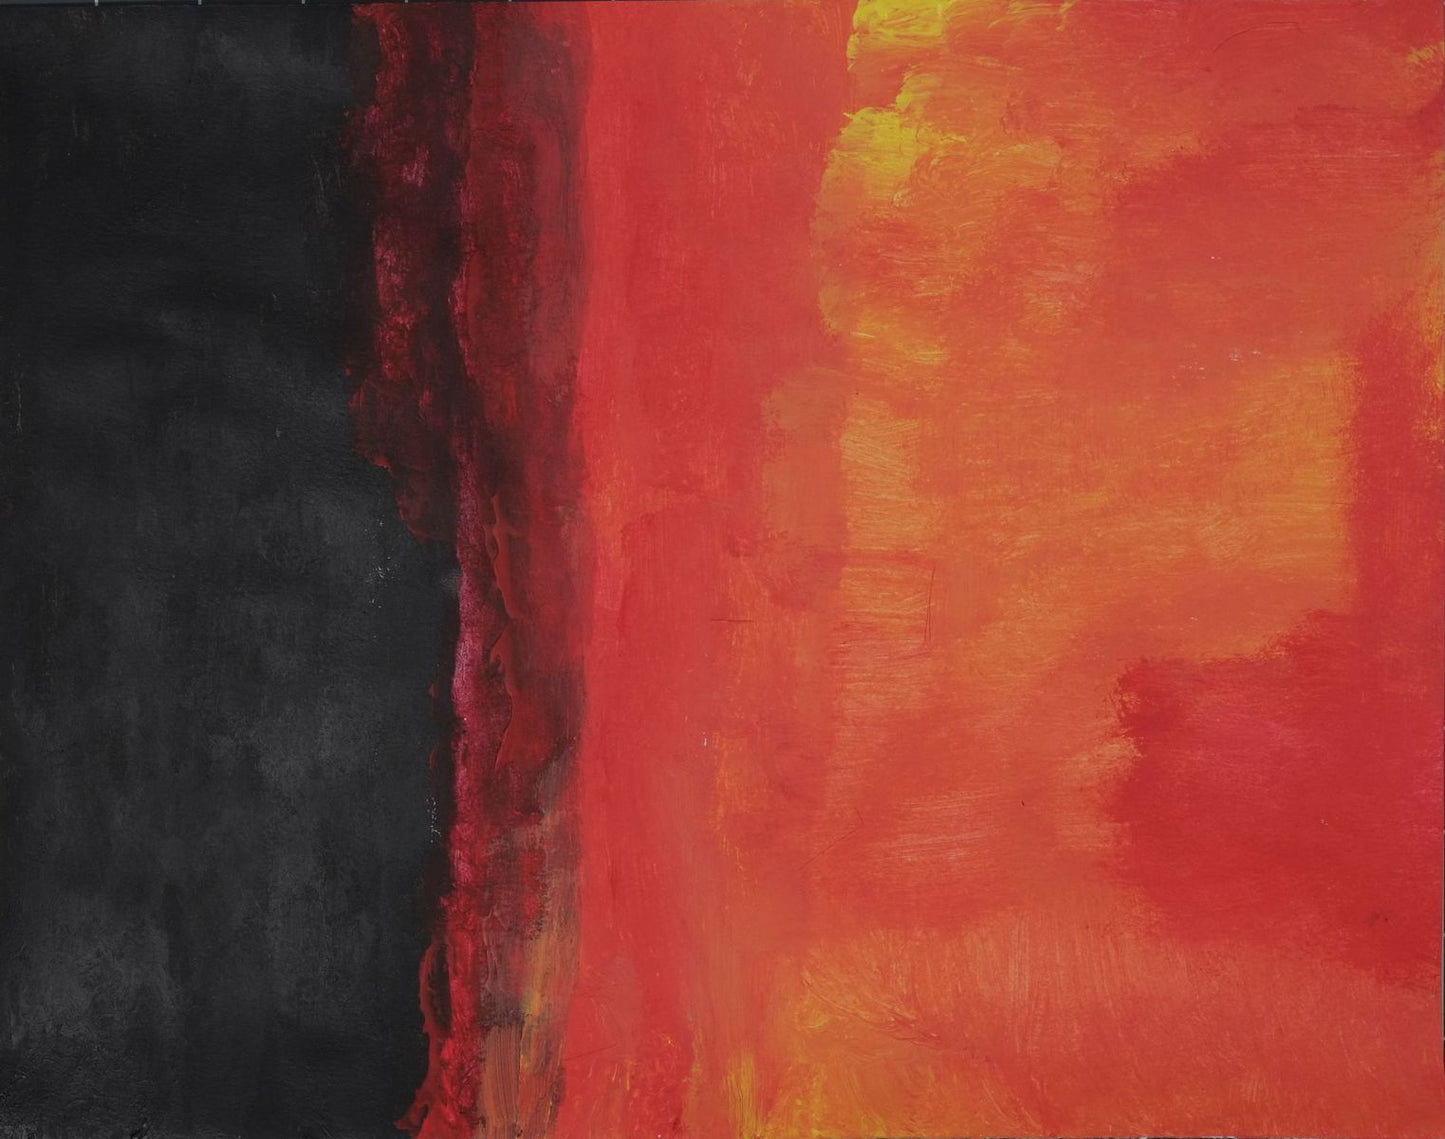 Acrylic on paper artwork with one vertical black stripe accounting for approximately one third of the painting with the remainder a mix of fiery red, yellow and orange